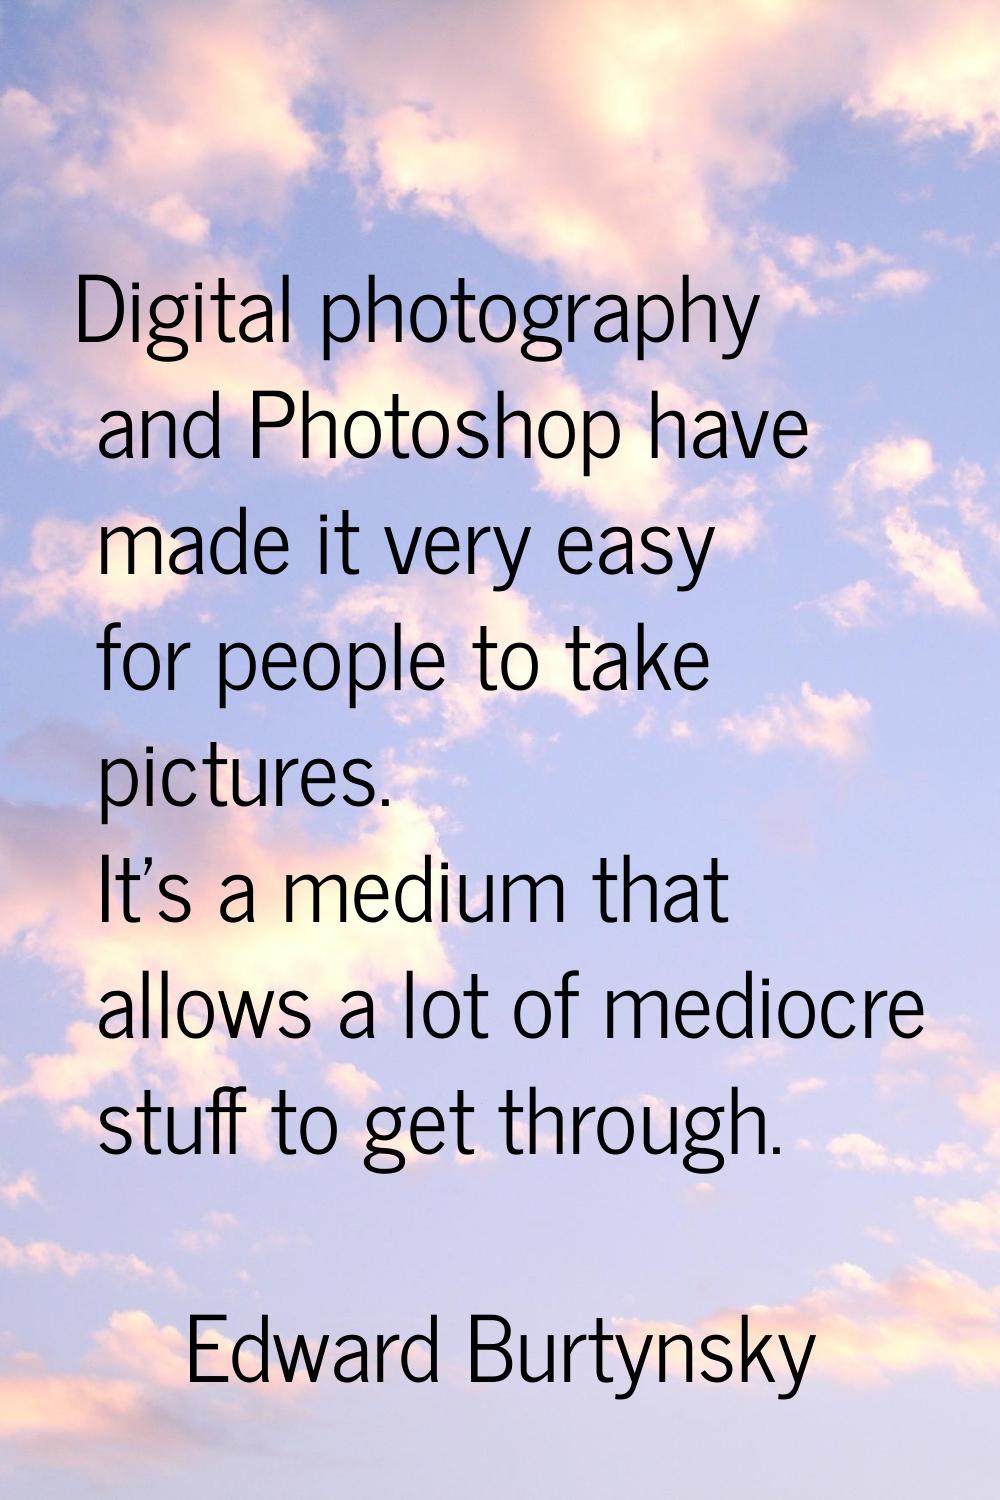 Digital photography and Photoshop have made it very easy for people to take pictures. It's a medium